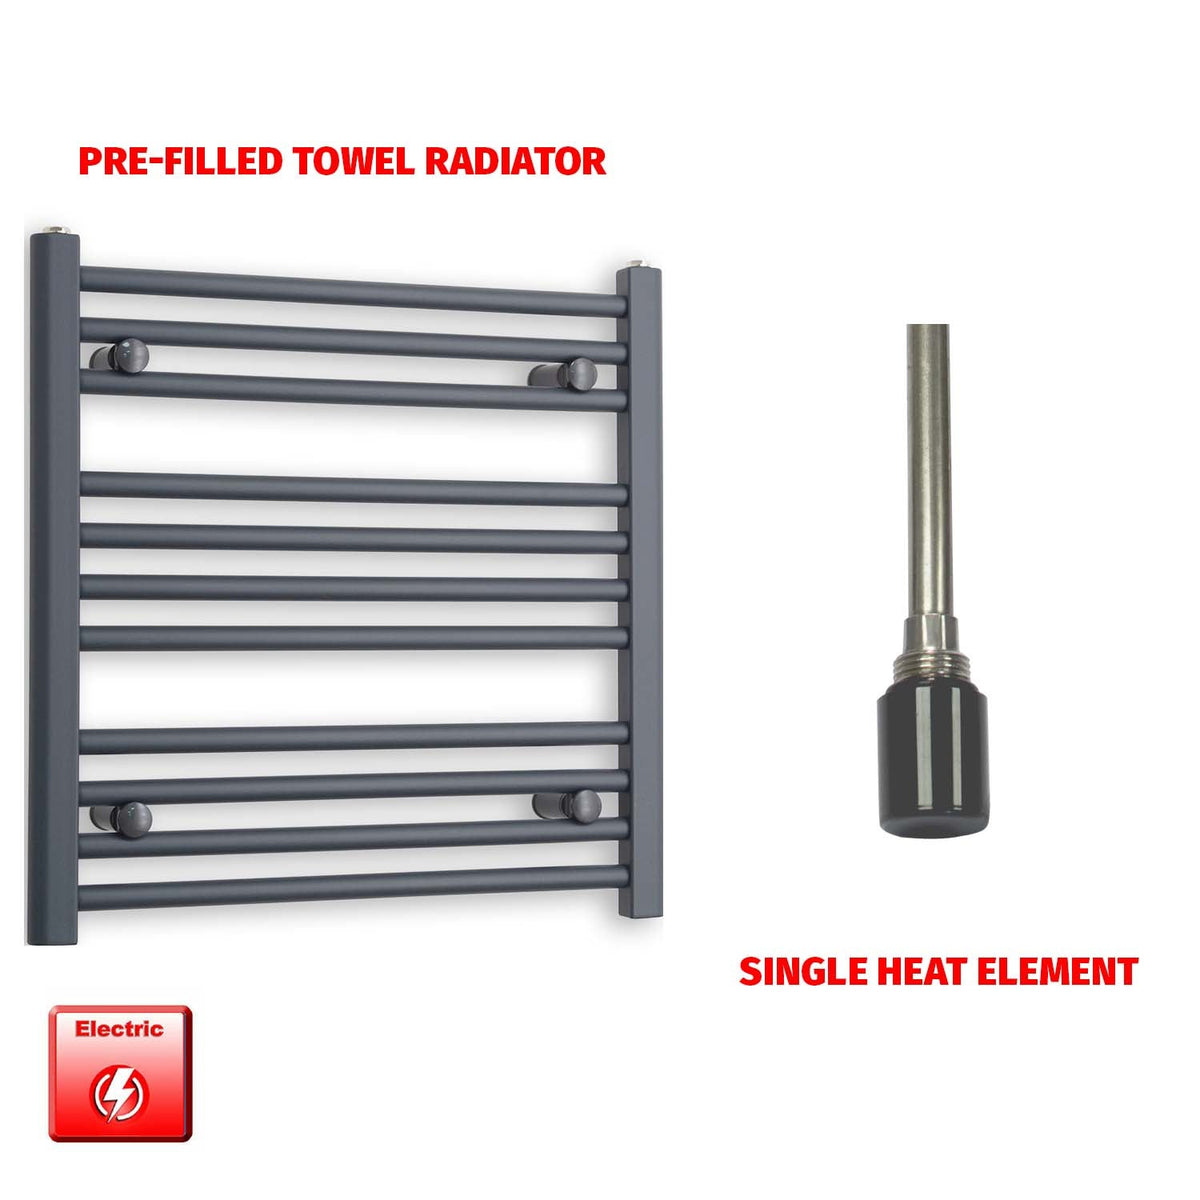 600mm High 500mm Wide Flat Anthracite Pre-Filled Electric Heated Towel Rail Radiator HTR Single Heat element no timer